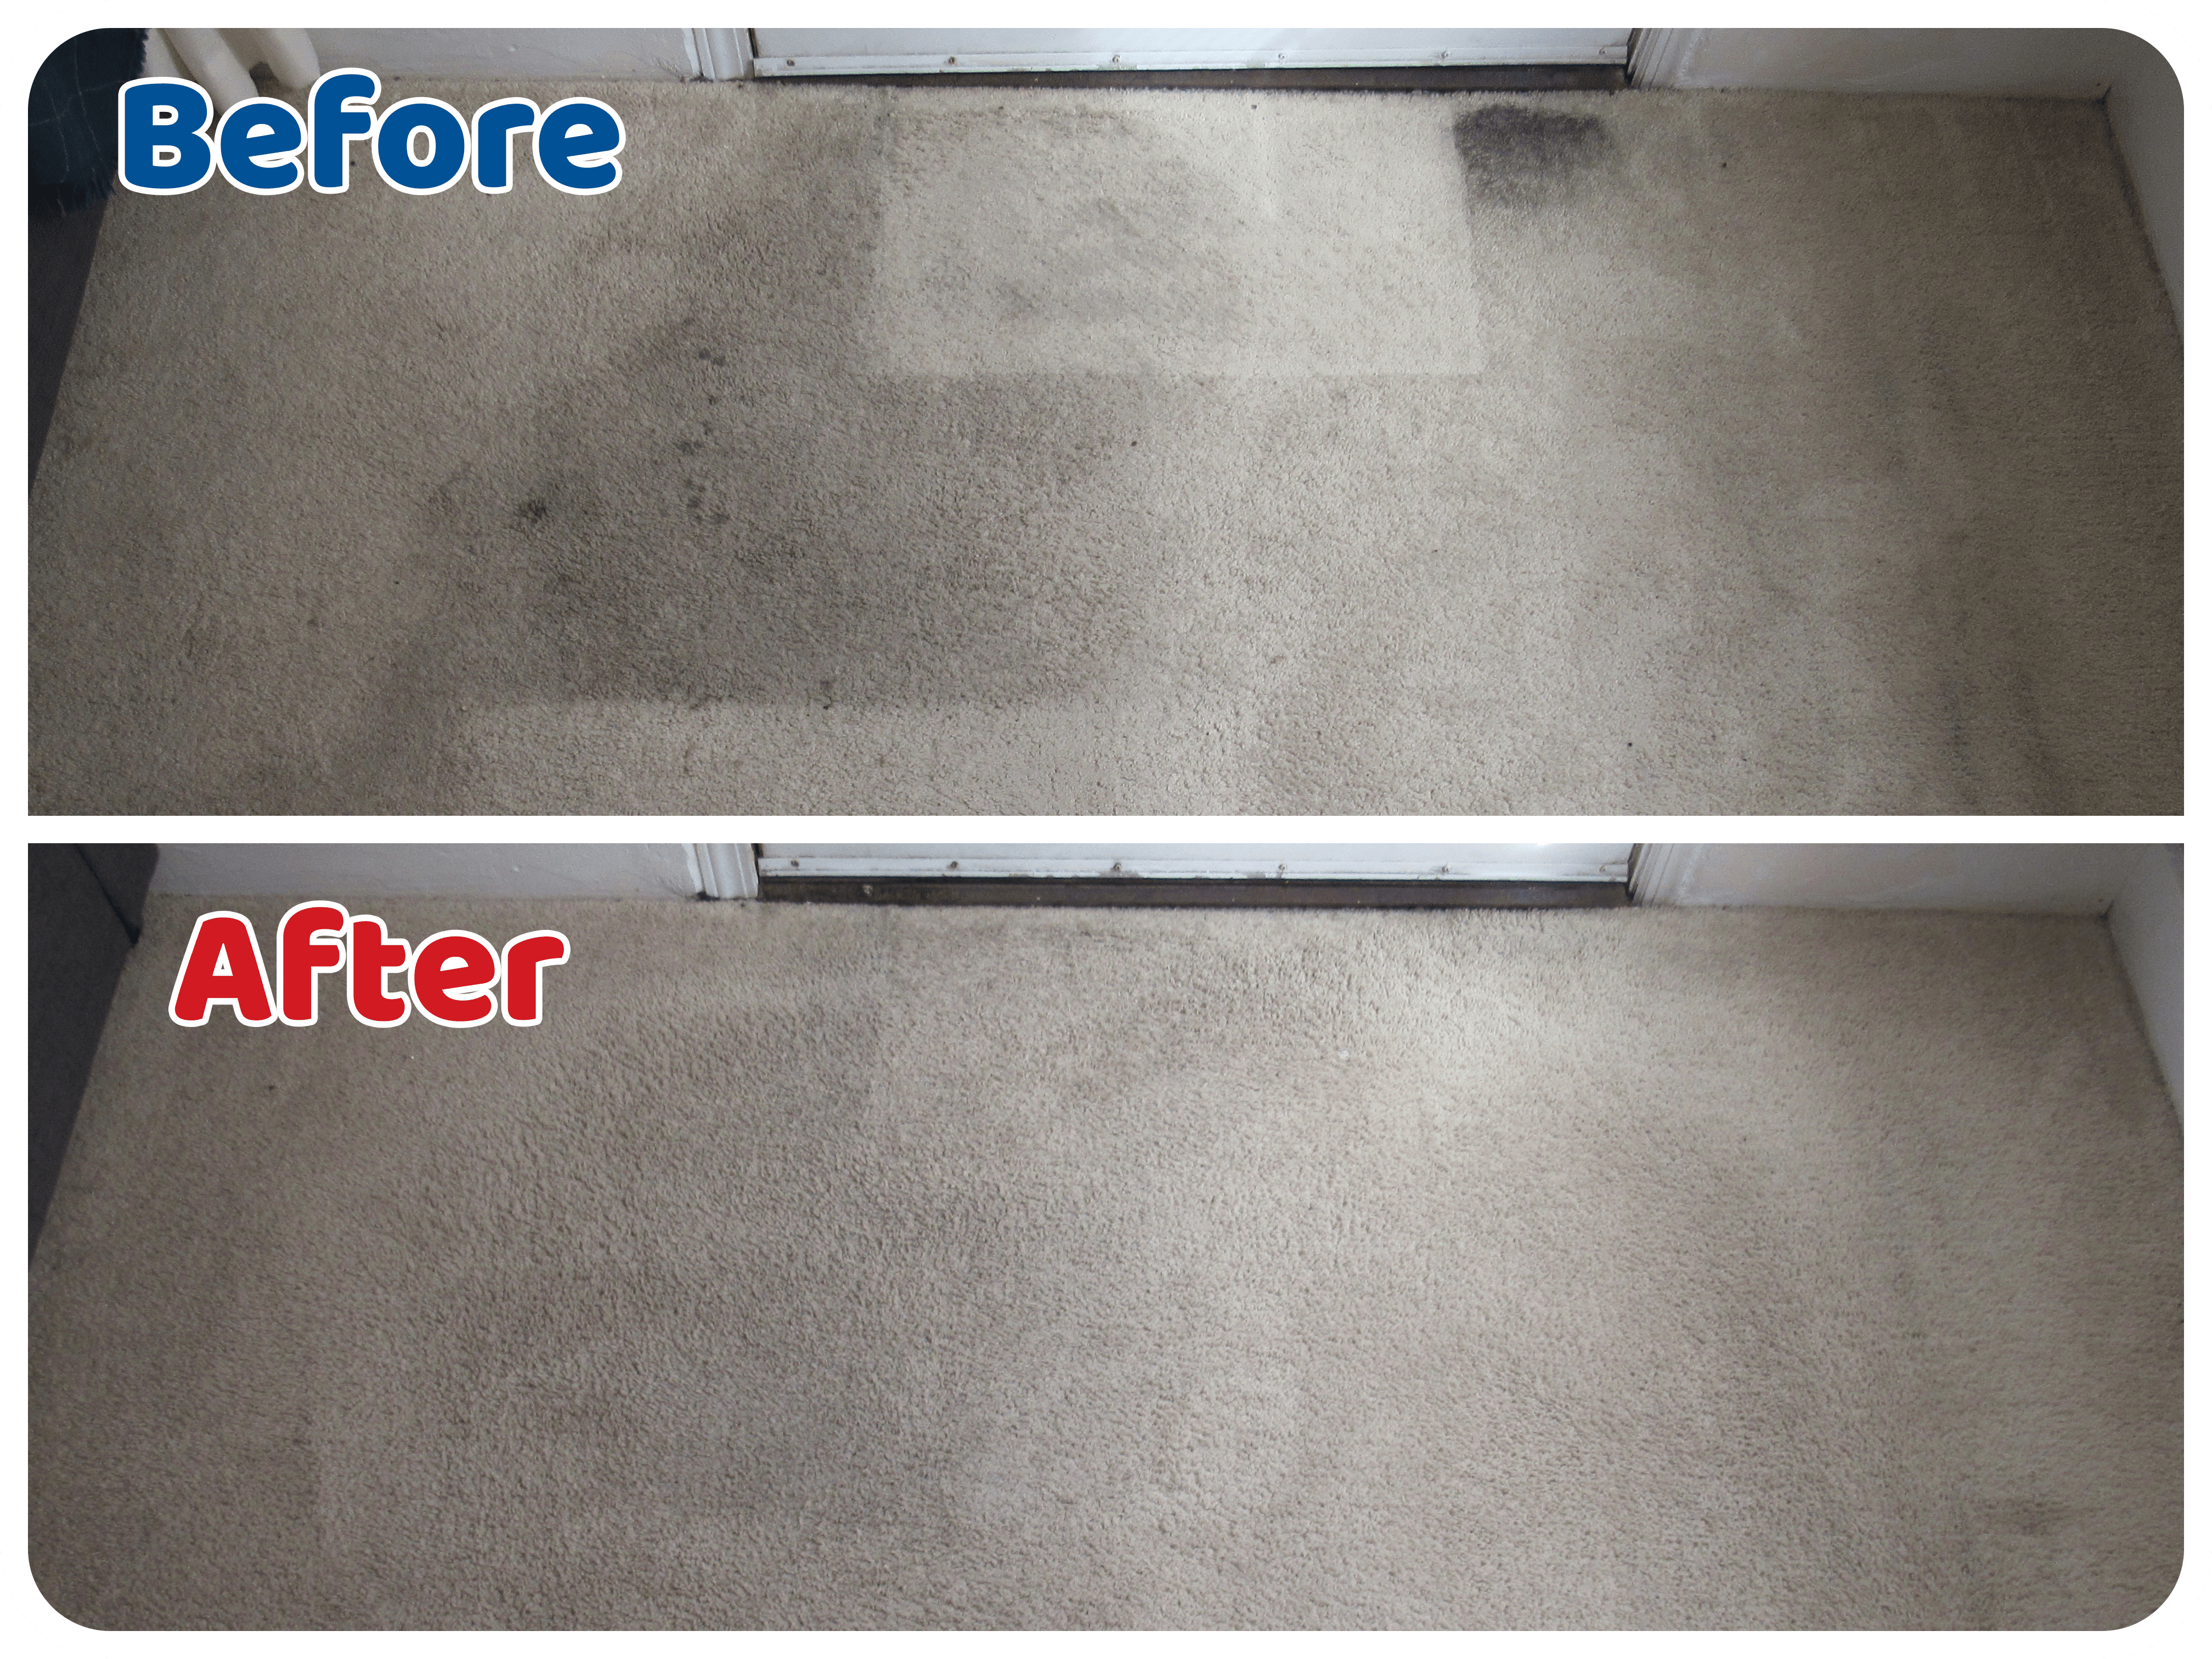 Carpet Upholstery Cleaning Services In Calhoun 109 Safe Dry